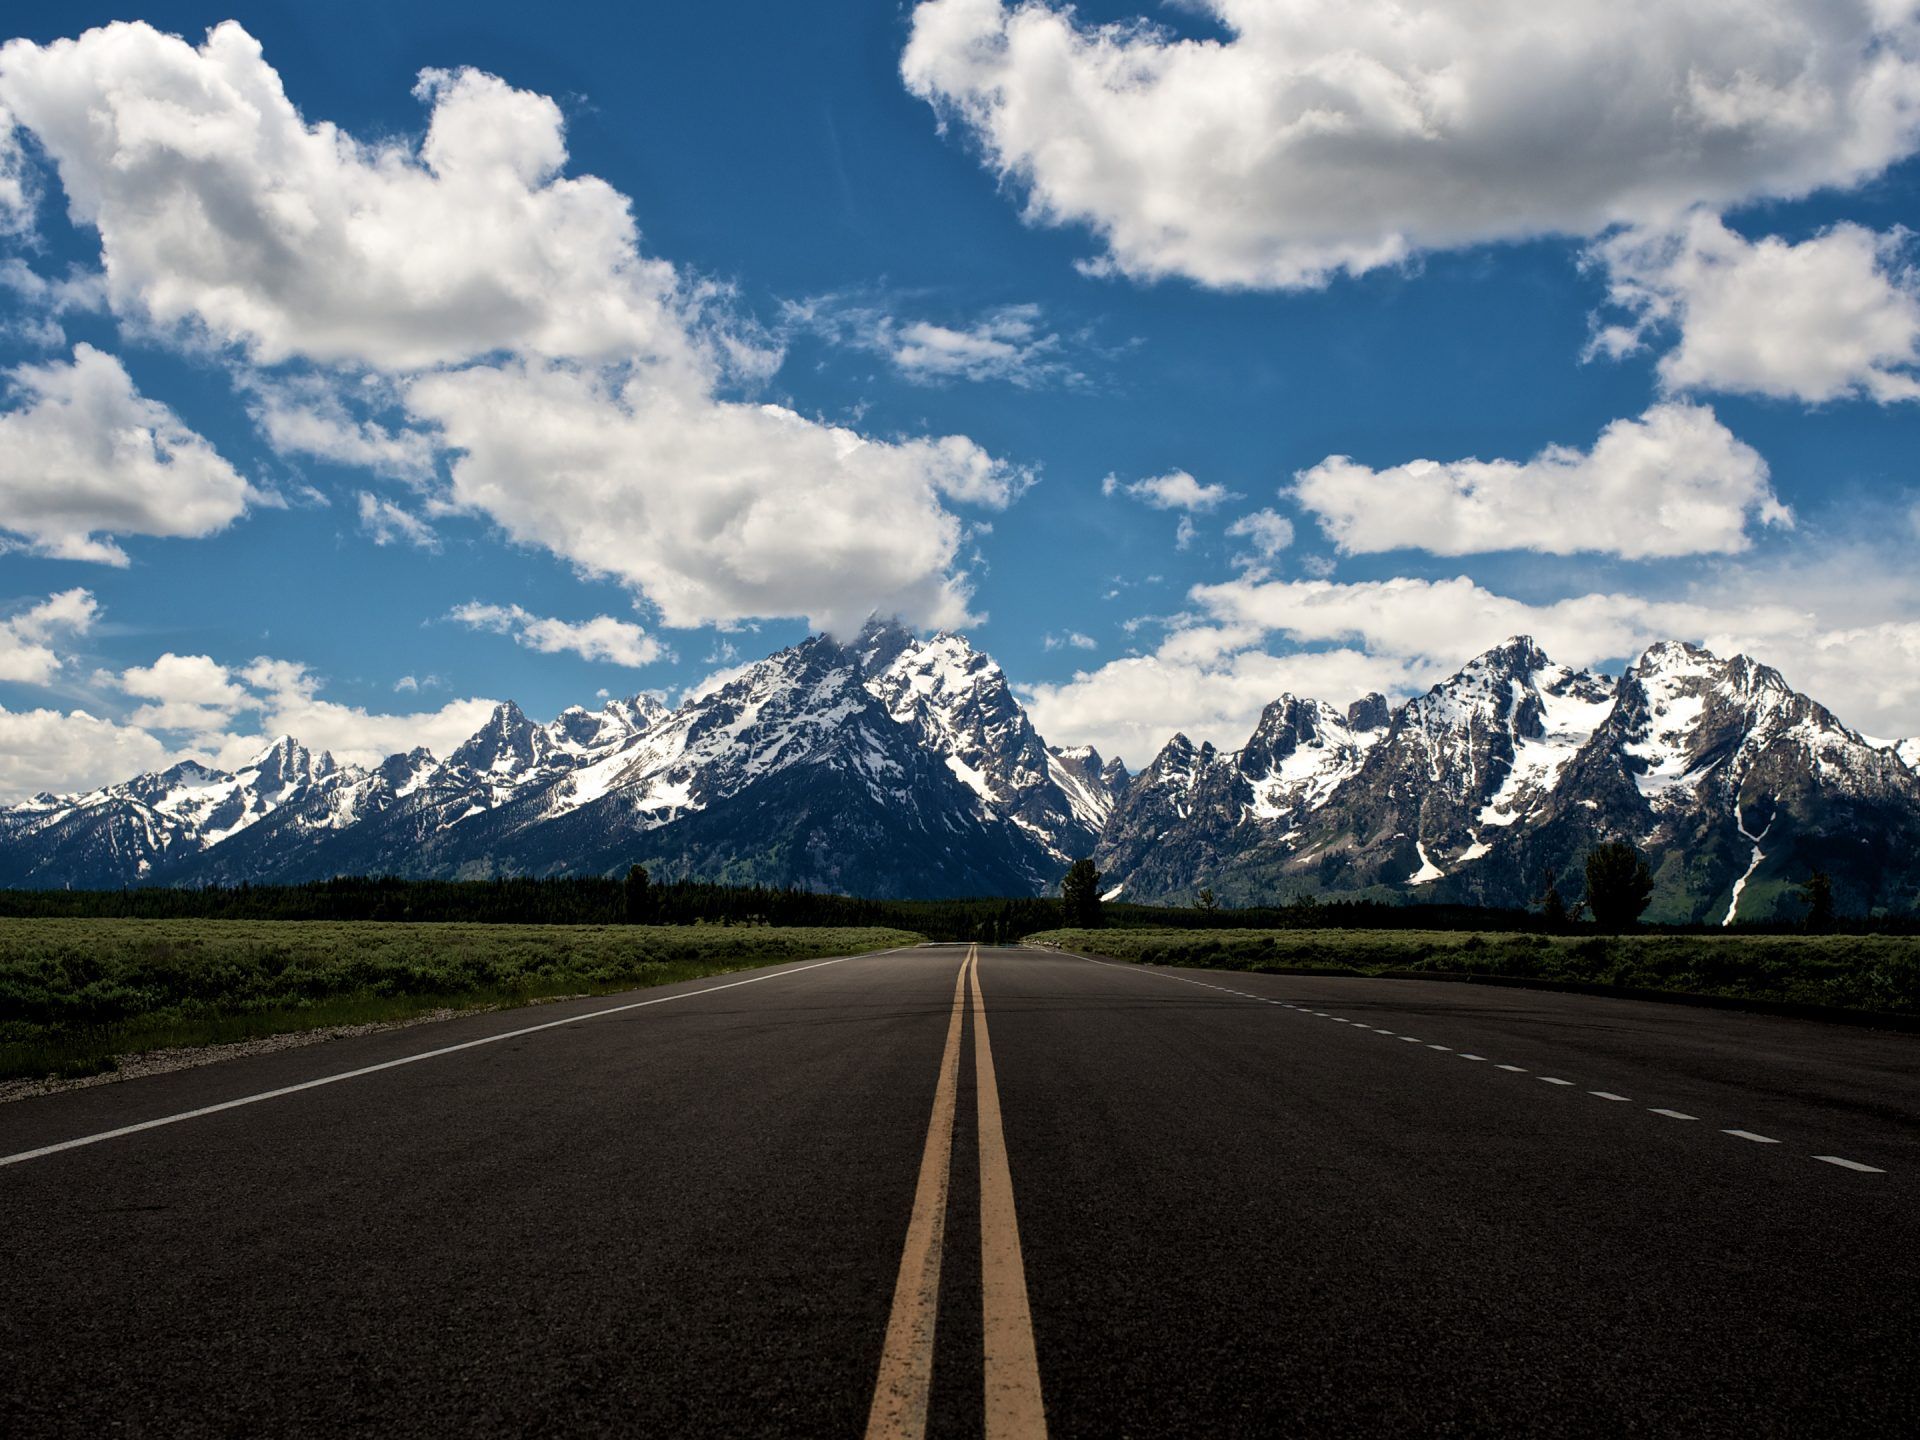 Empty Lanes, Highway, Rocky Mountains With Snow, Blue Sky And White Clouds Desktop Wallpaper HD 3840x2160, Wallpaper13.com